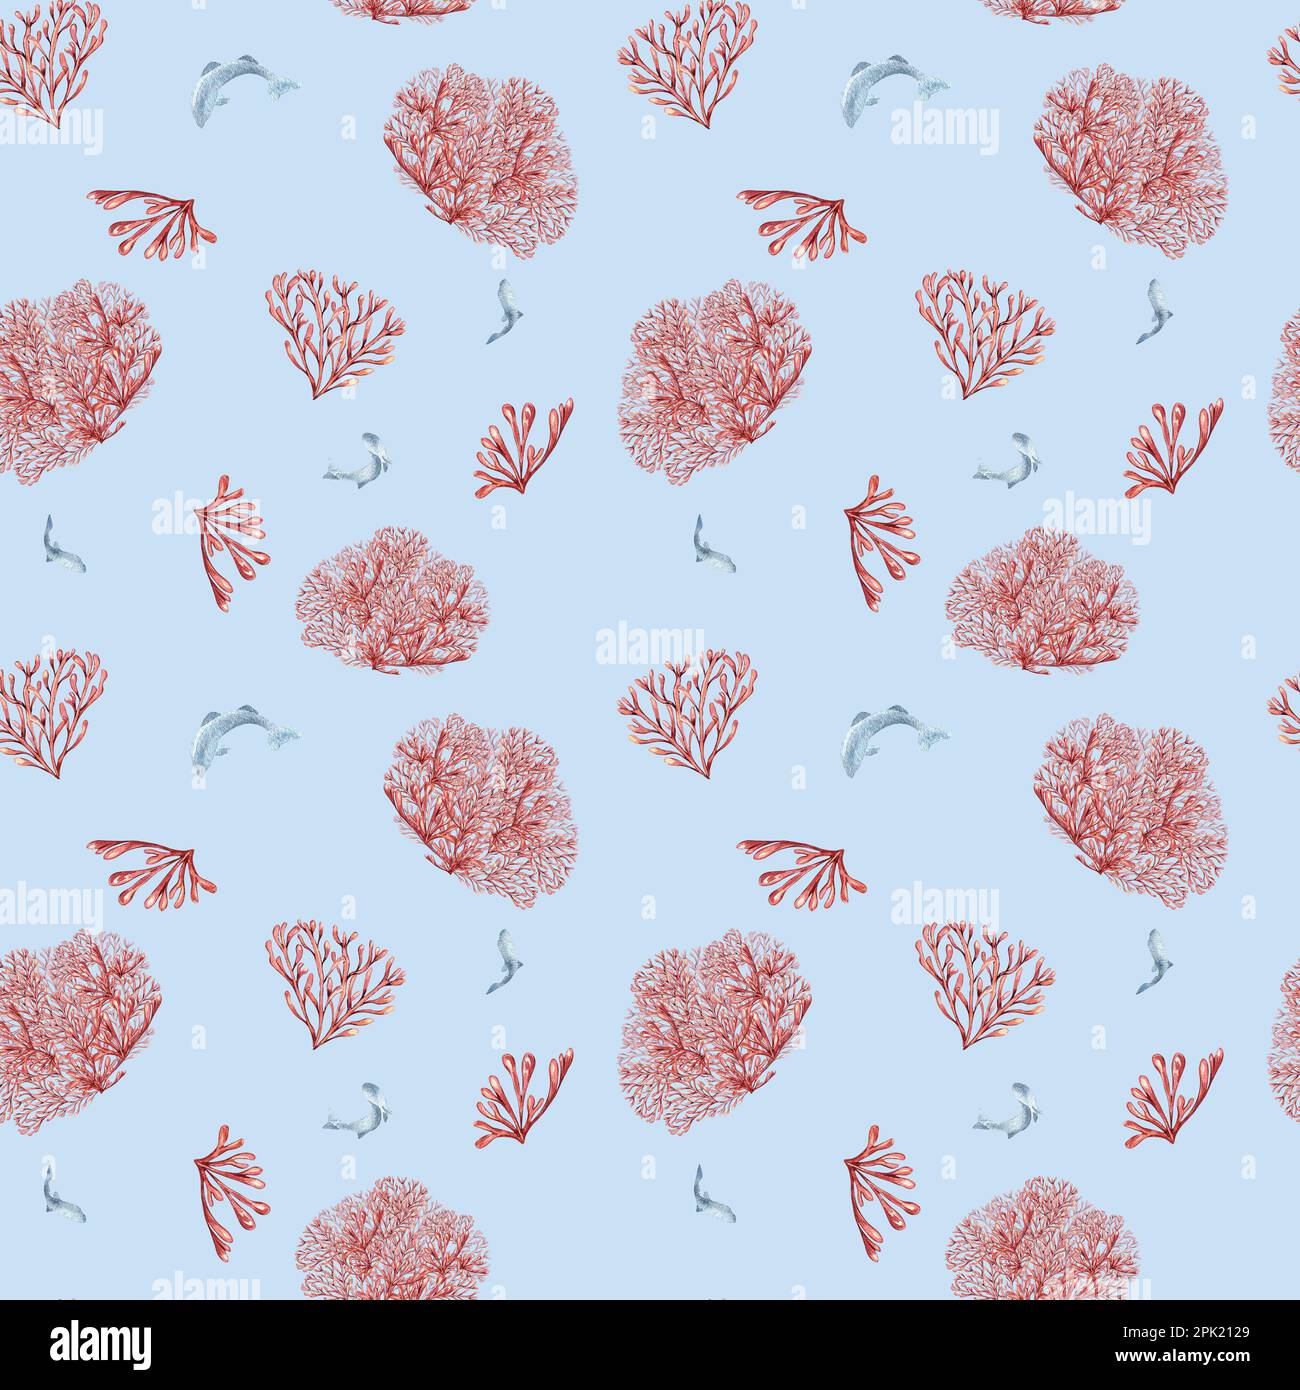 Seamless pattern of sea plants, coral watercolor isolated on blue background. Pink agar agar seaweed and fish hand drawn. Design element for package, Stock Photo